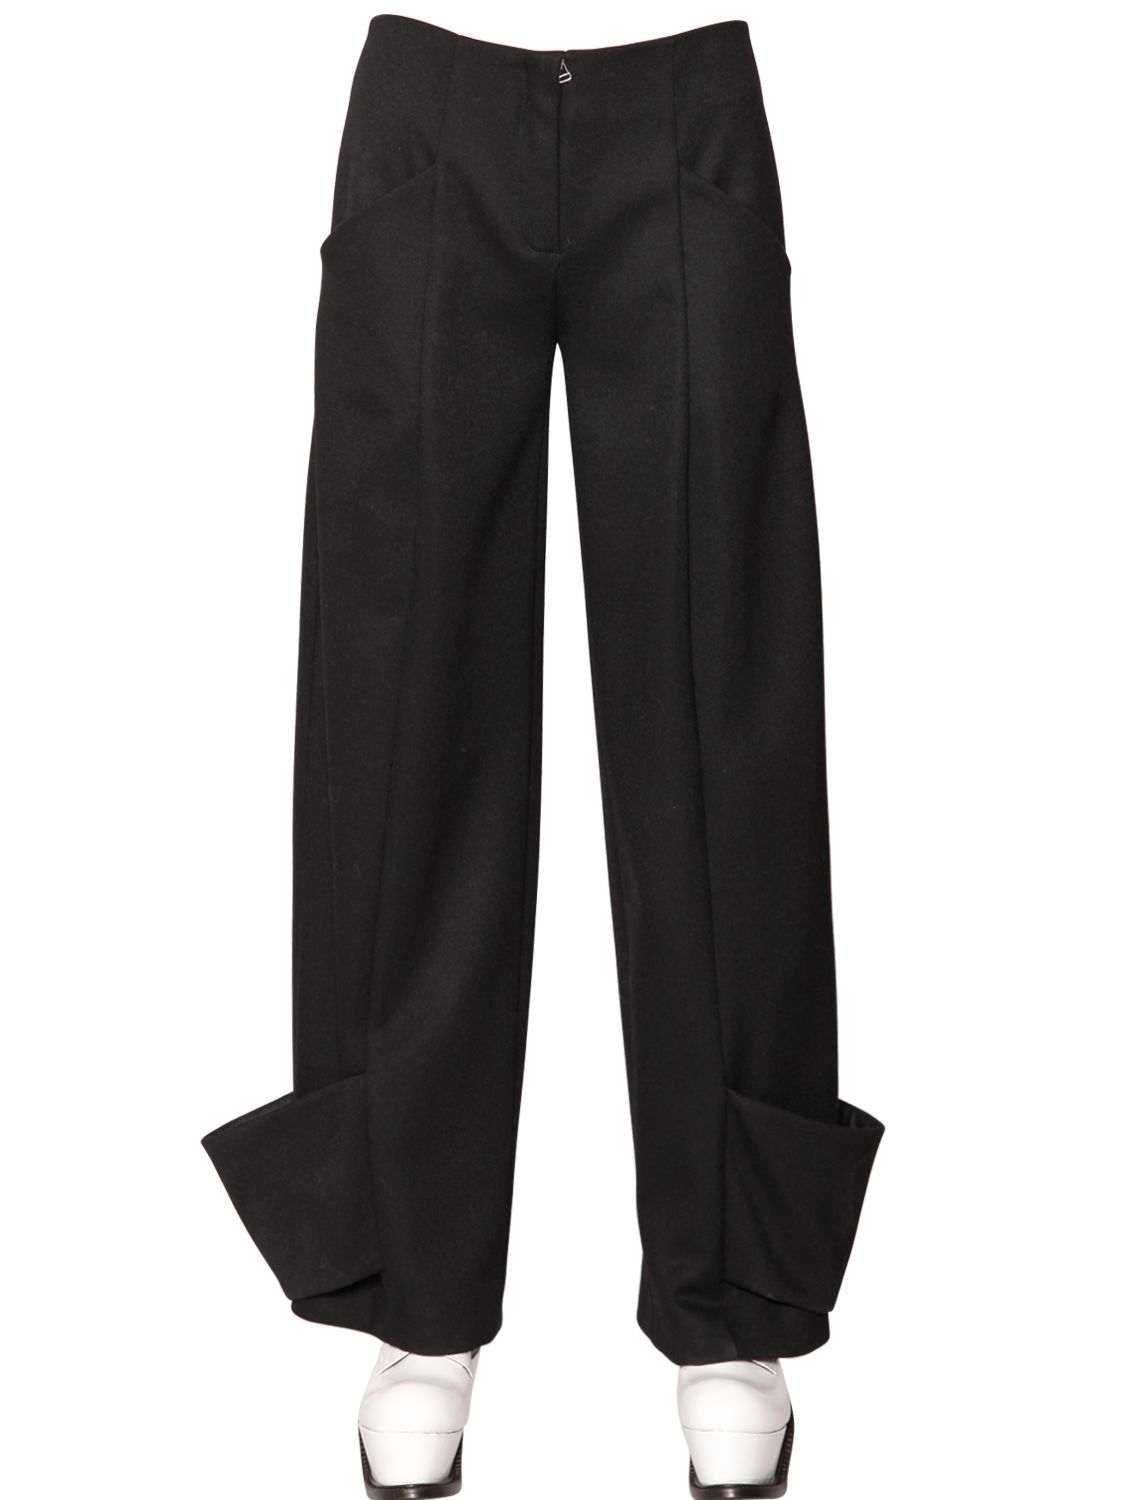 J.w. anderson Cuffed Wool Trousers in Black for Men - Save 30% | Lyst